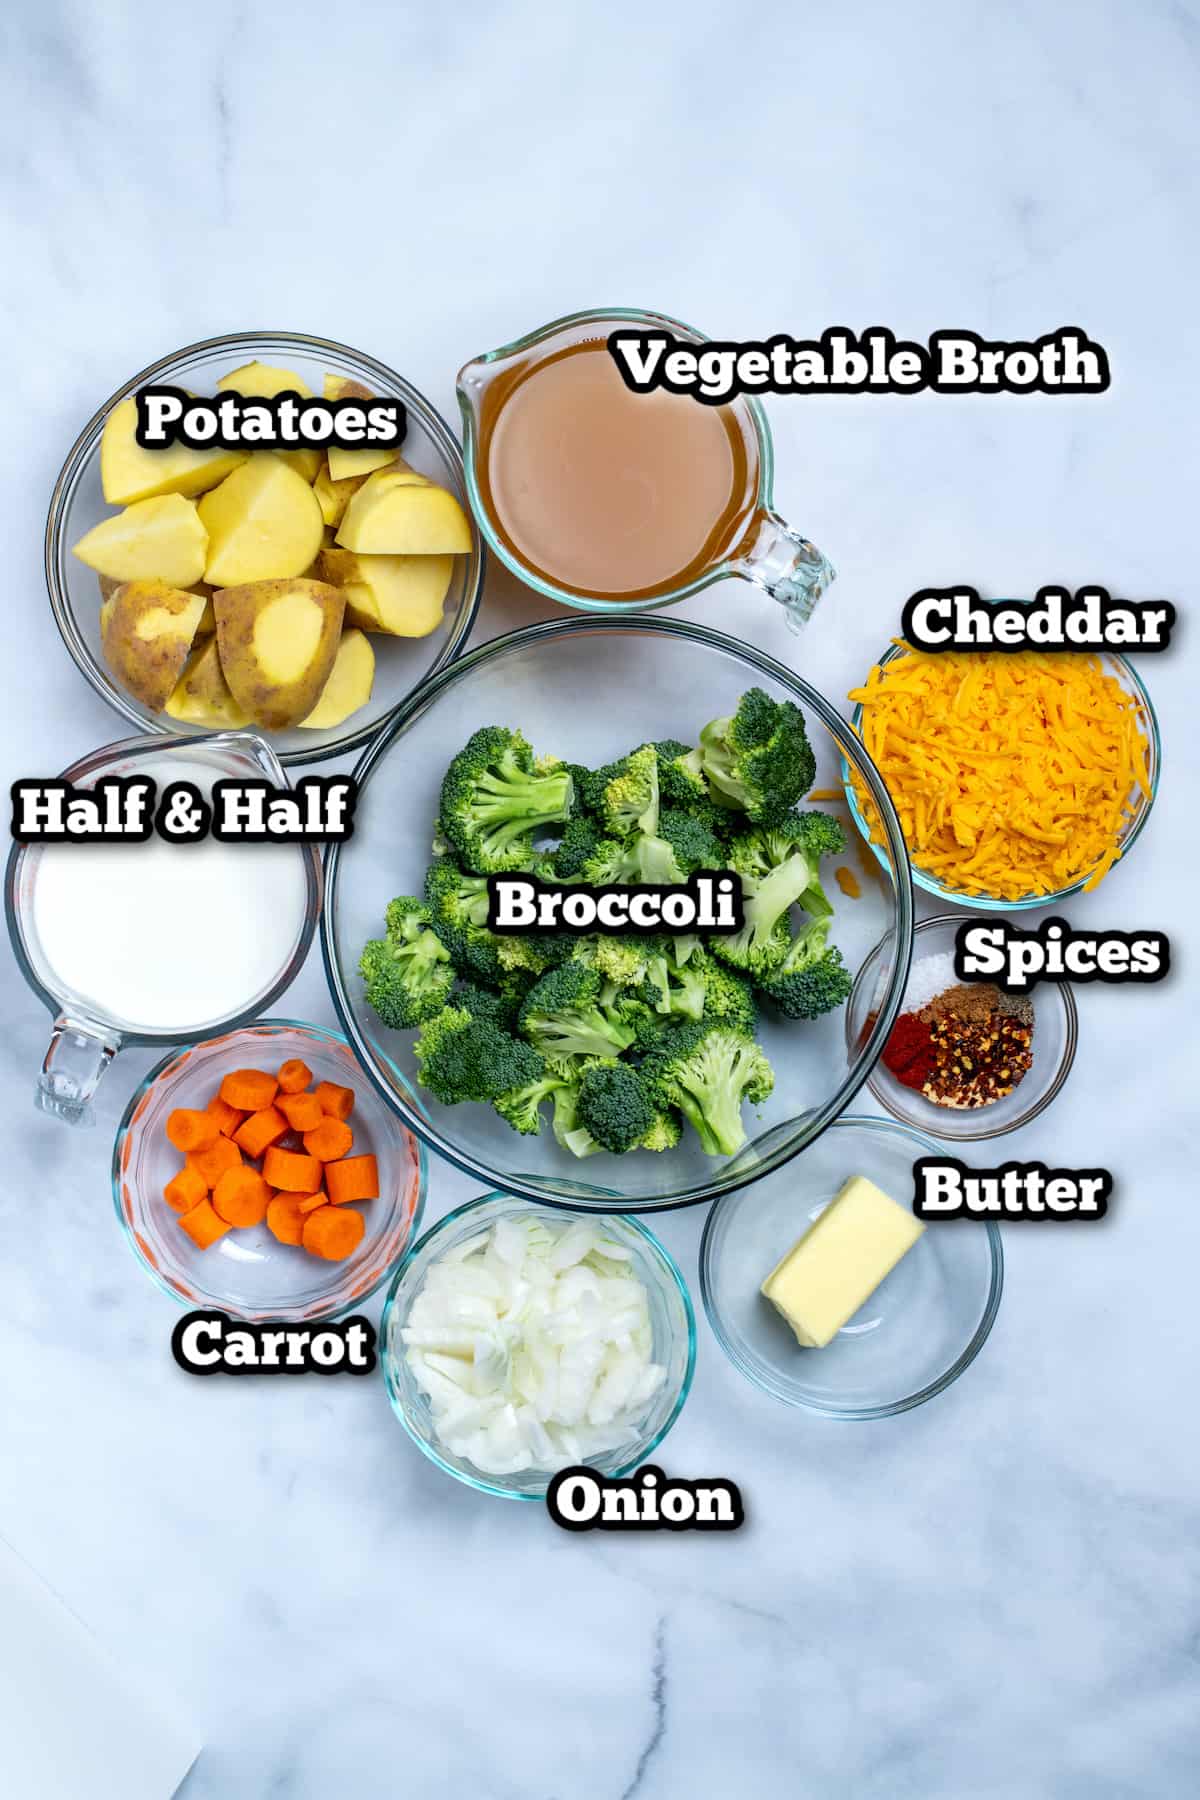 Ingredients for broccoli cheddar soup on a table